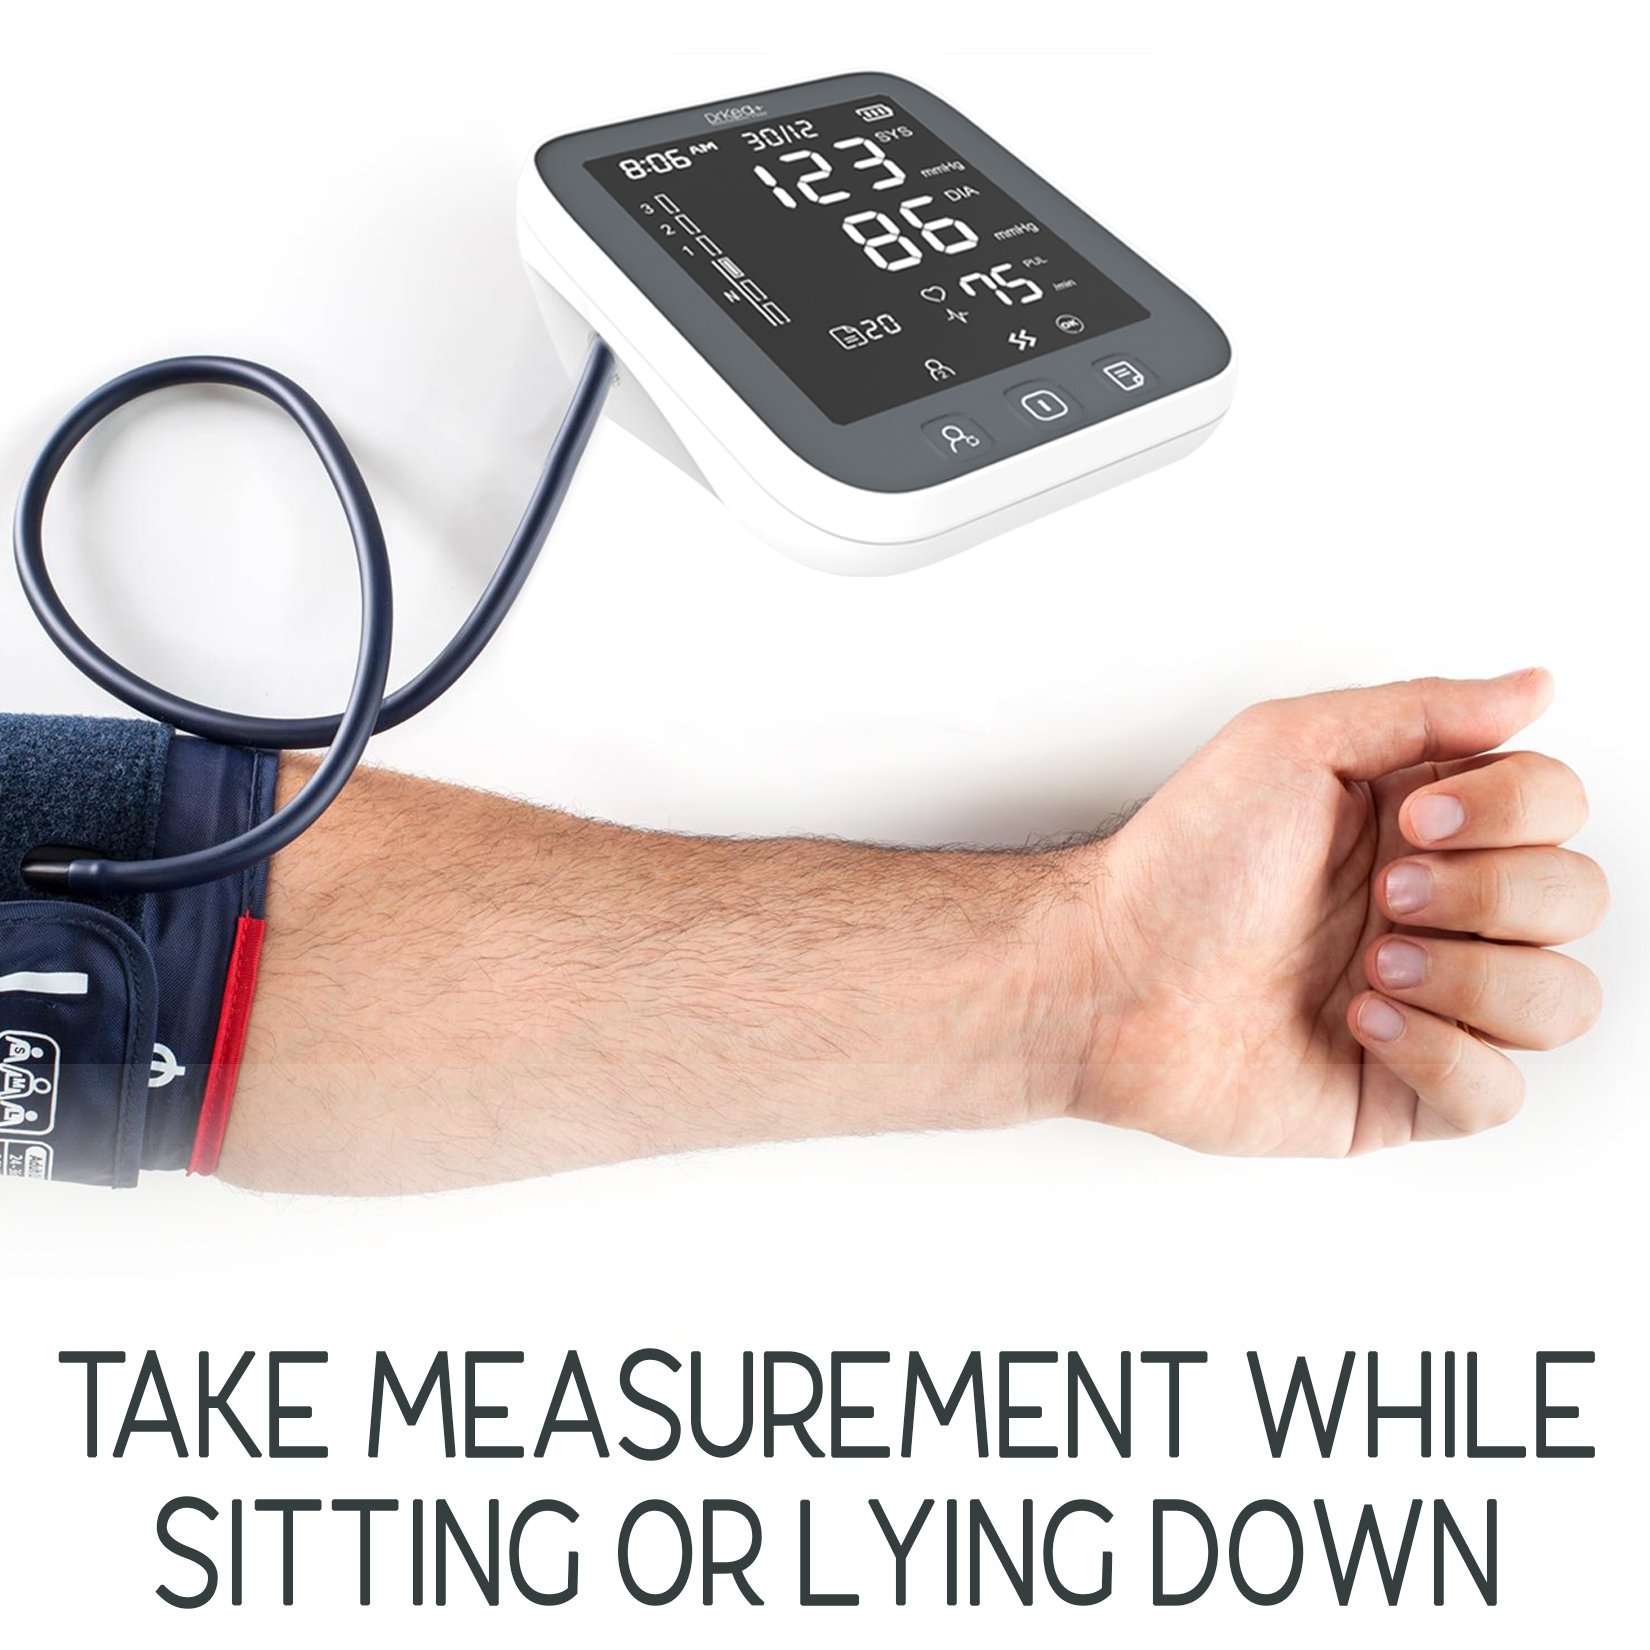 How To Take Blood Pressure At Home With Wrist Cuff